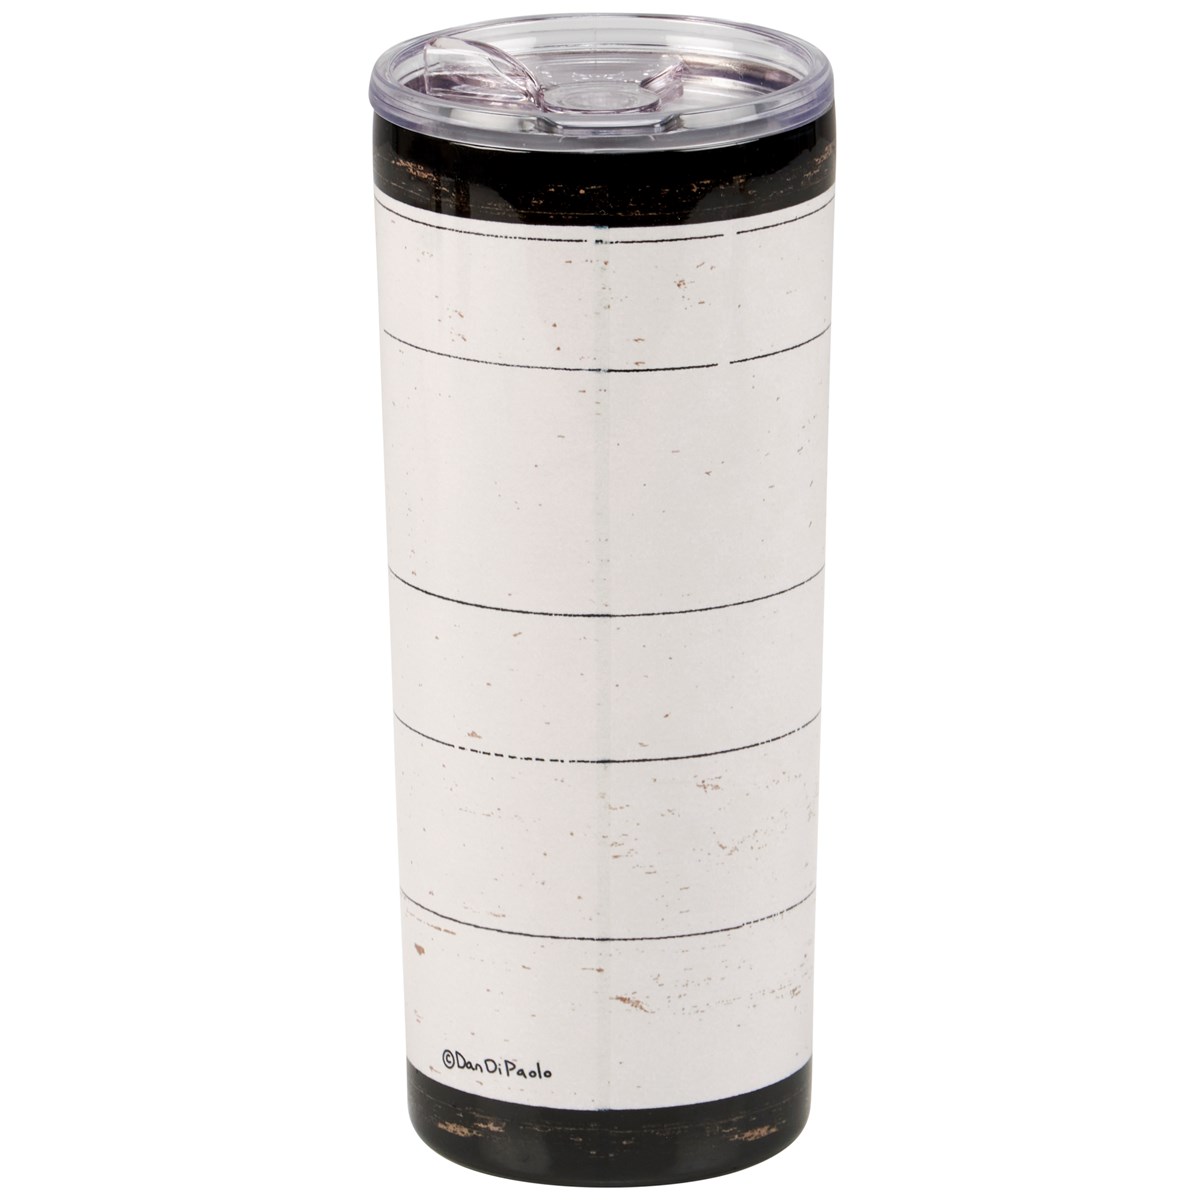 Cluck It Coffee Tumbler - Stainless Steel, Plastic